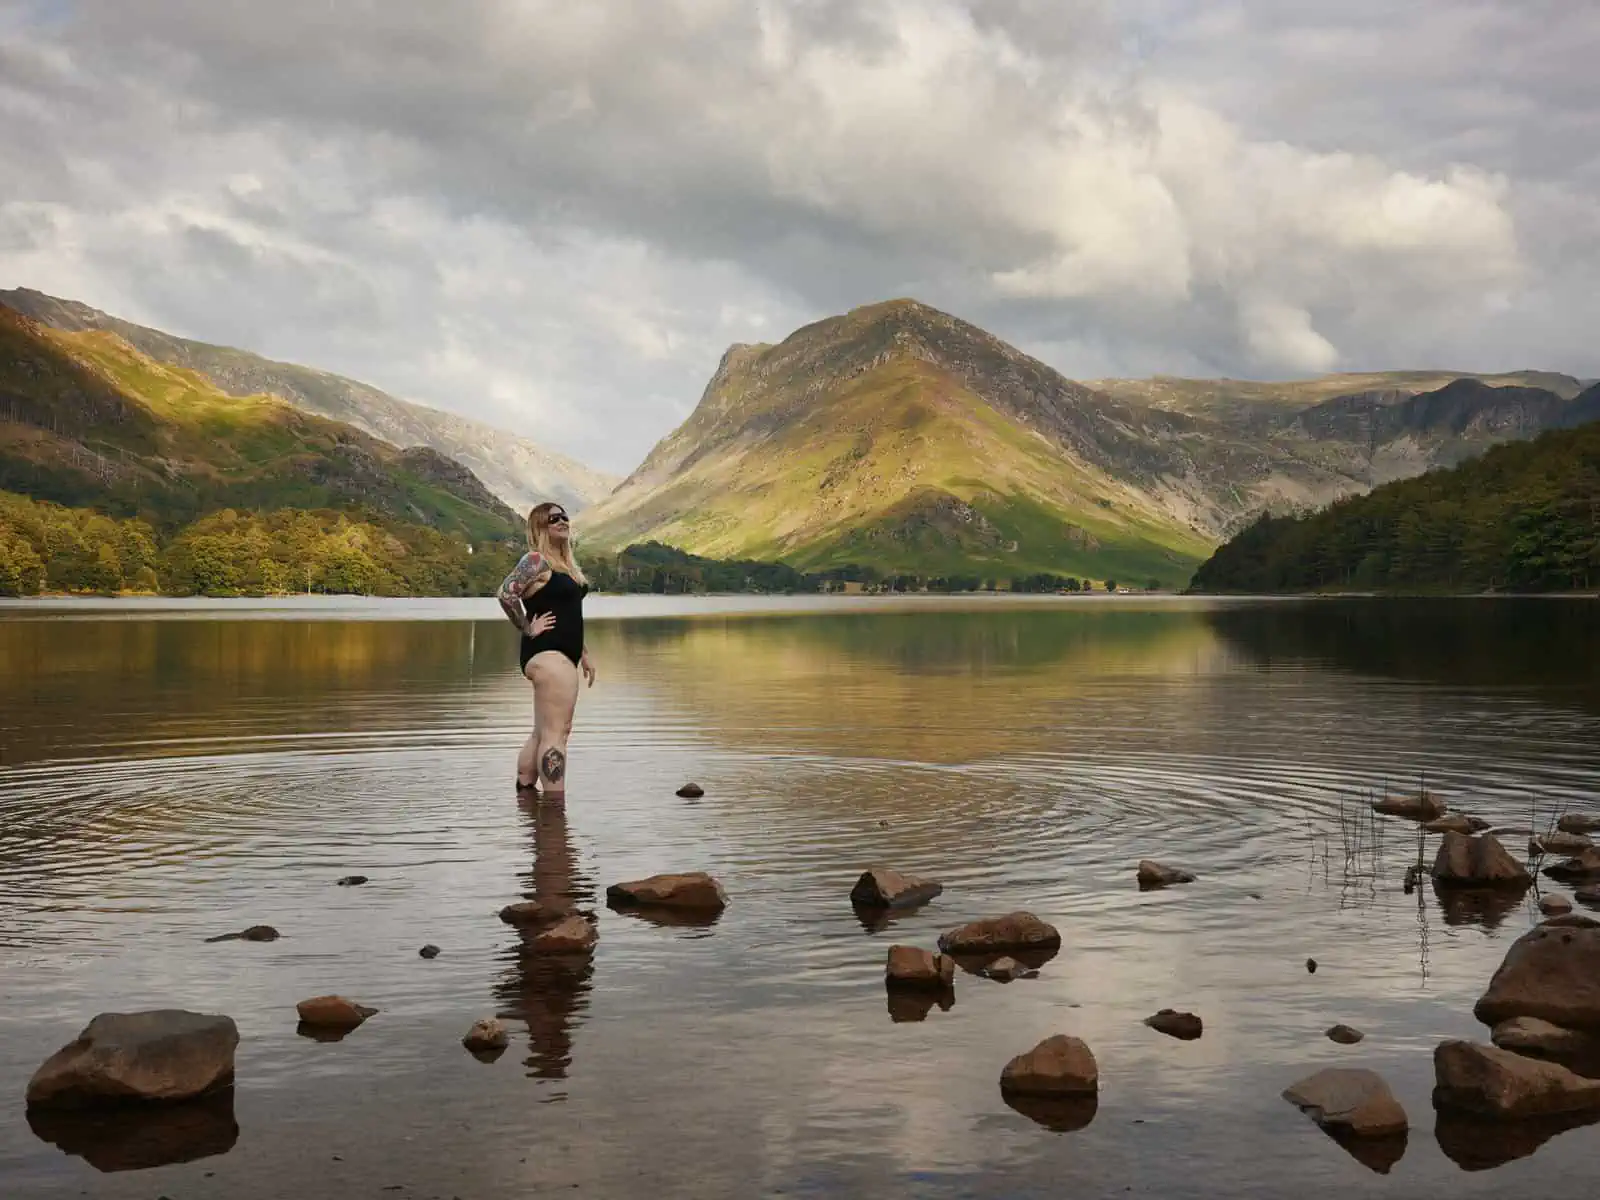 Finding ‘That Feeling’ Again in the Lake District